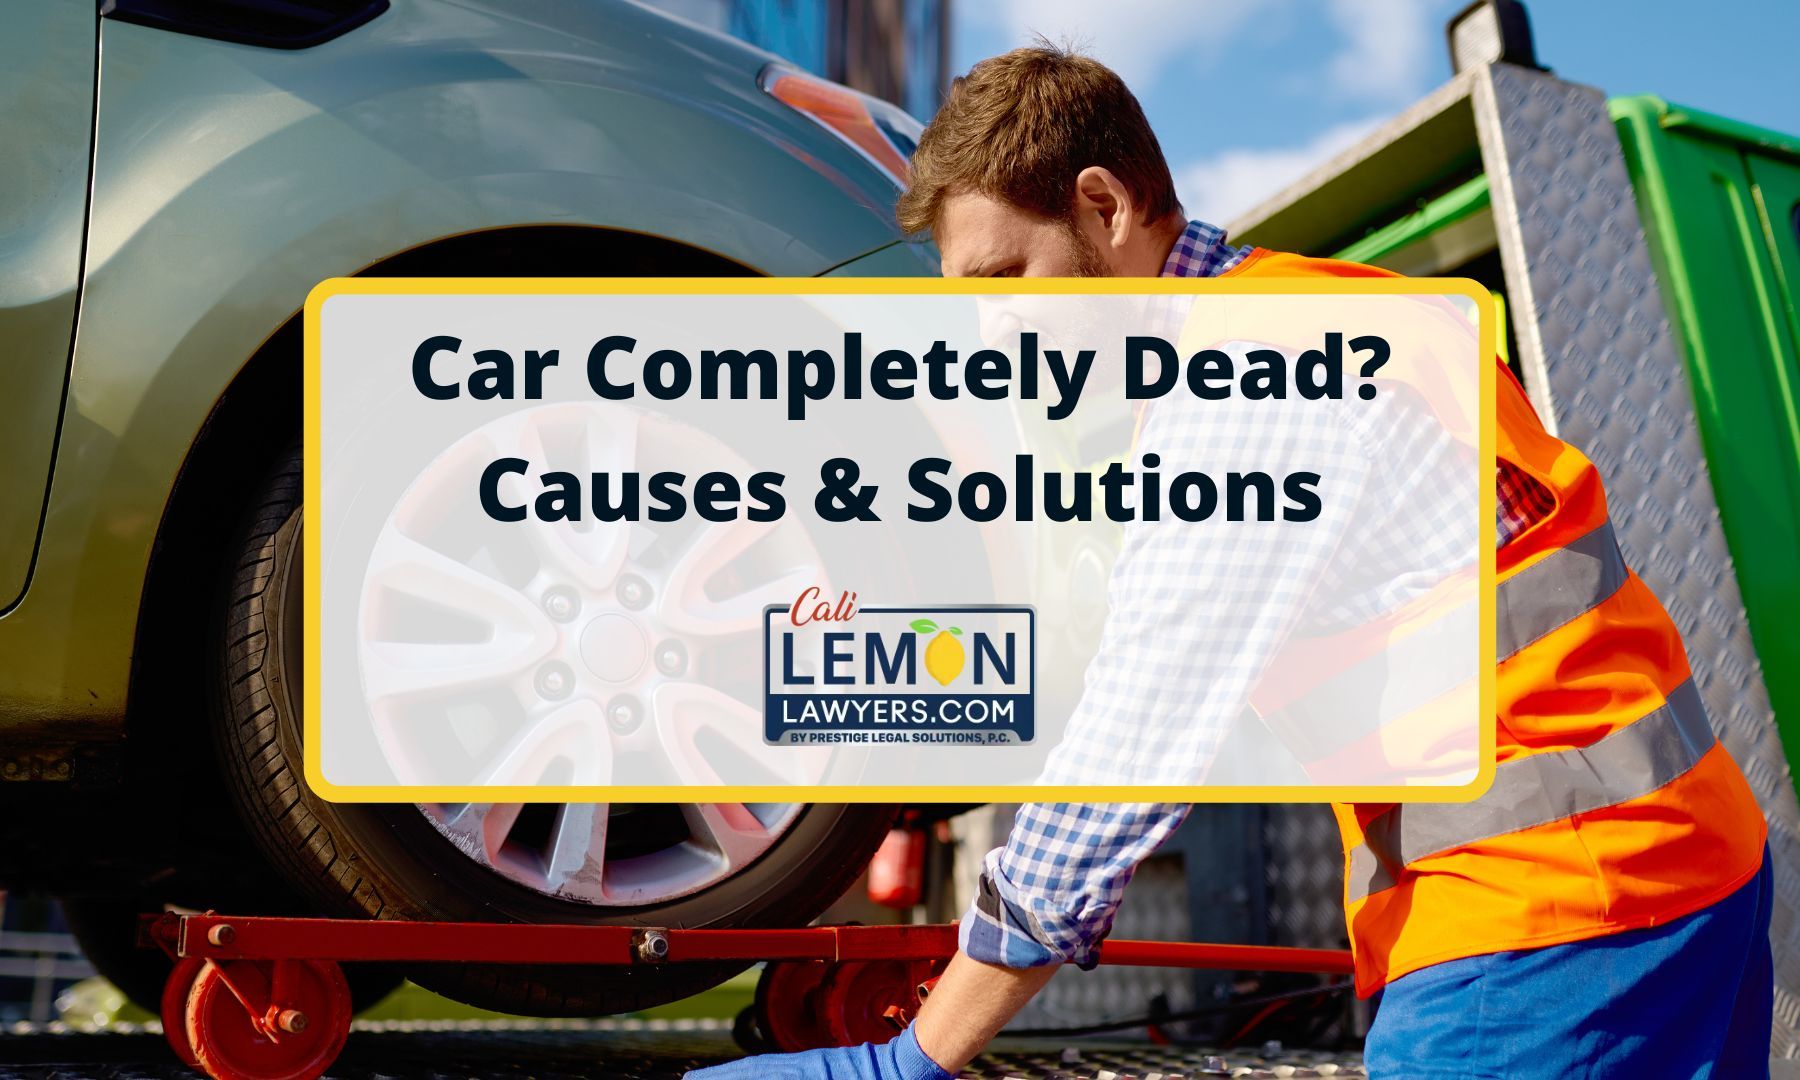 Car Completely Dead? Causes & Solutions